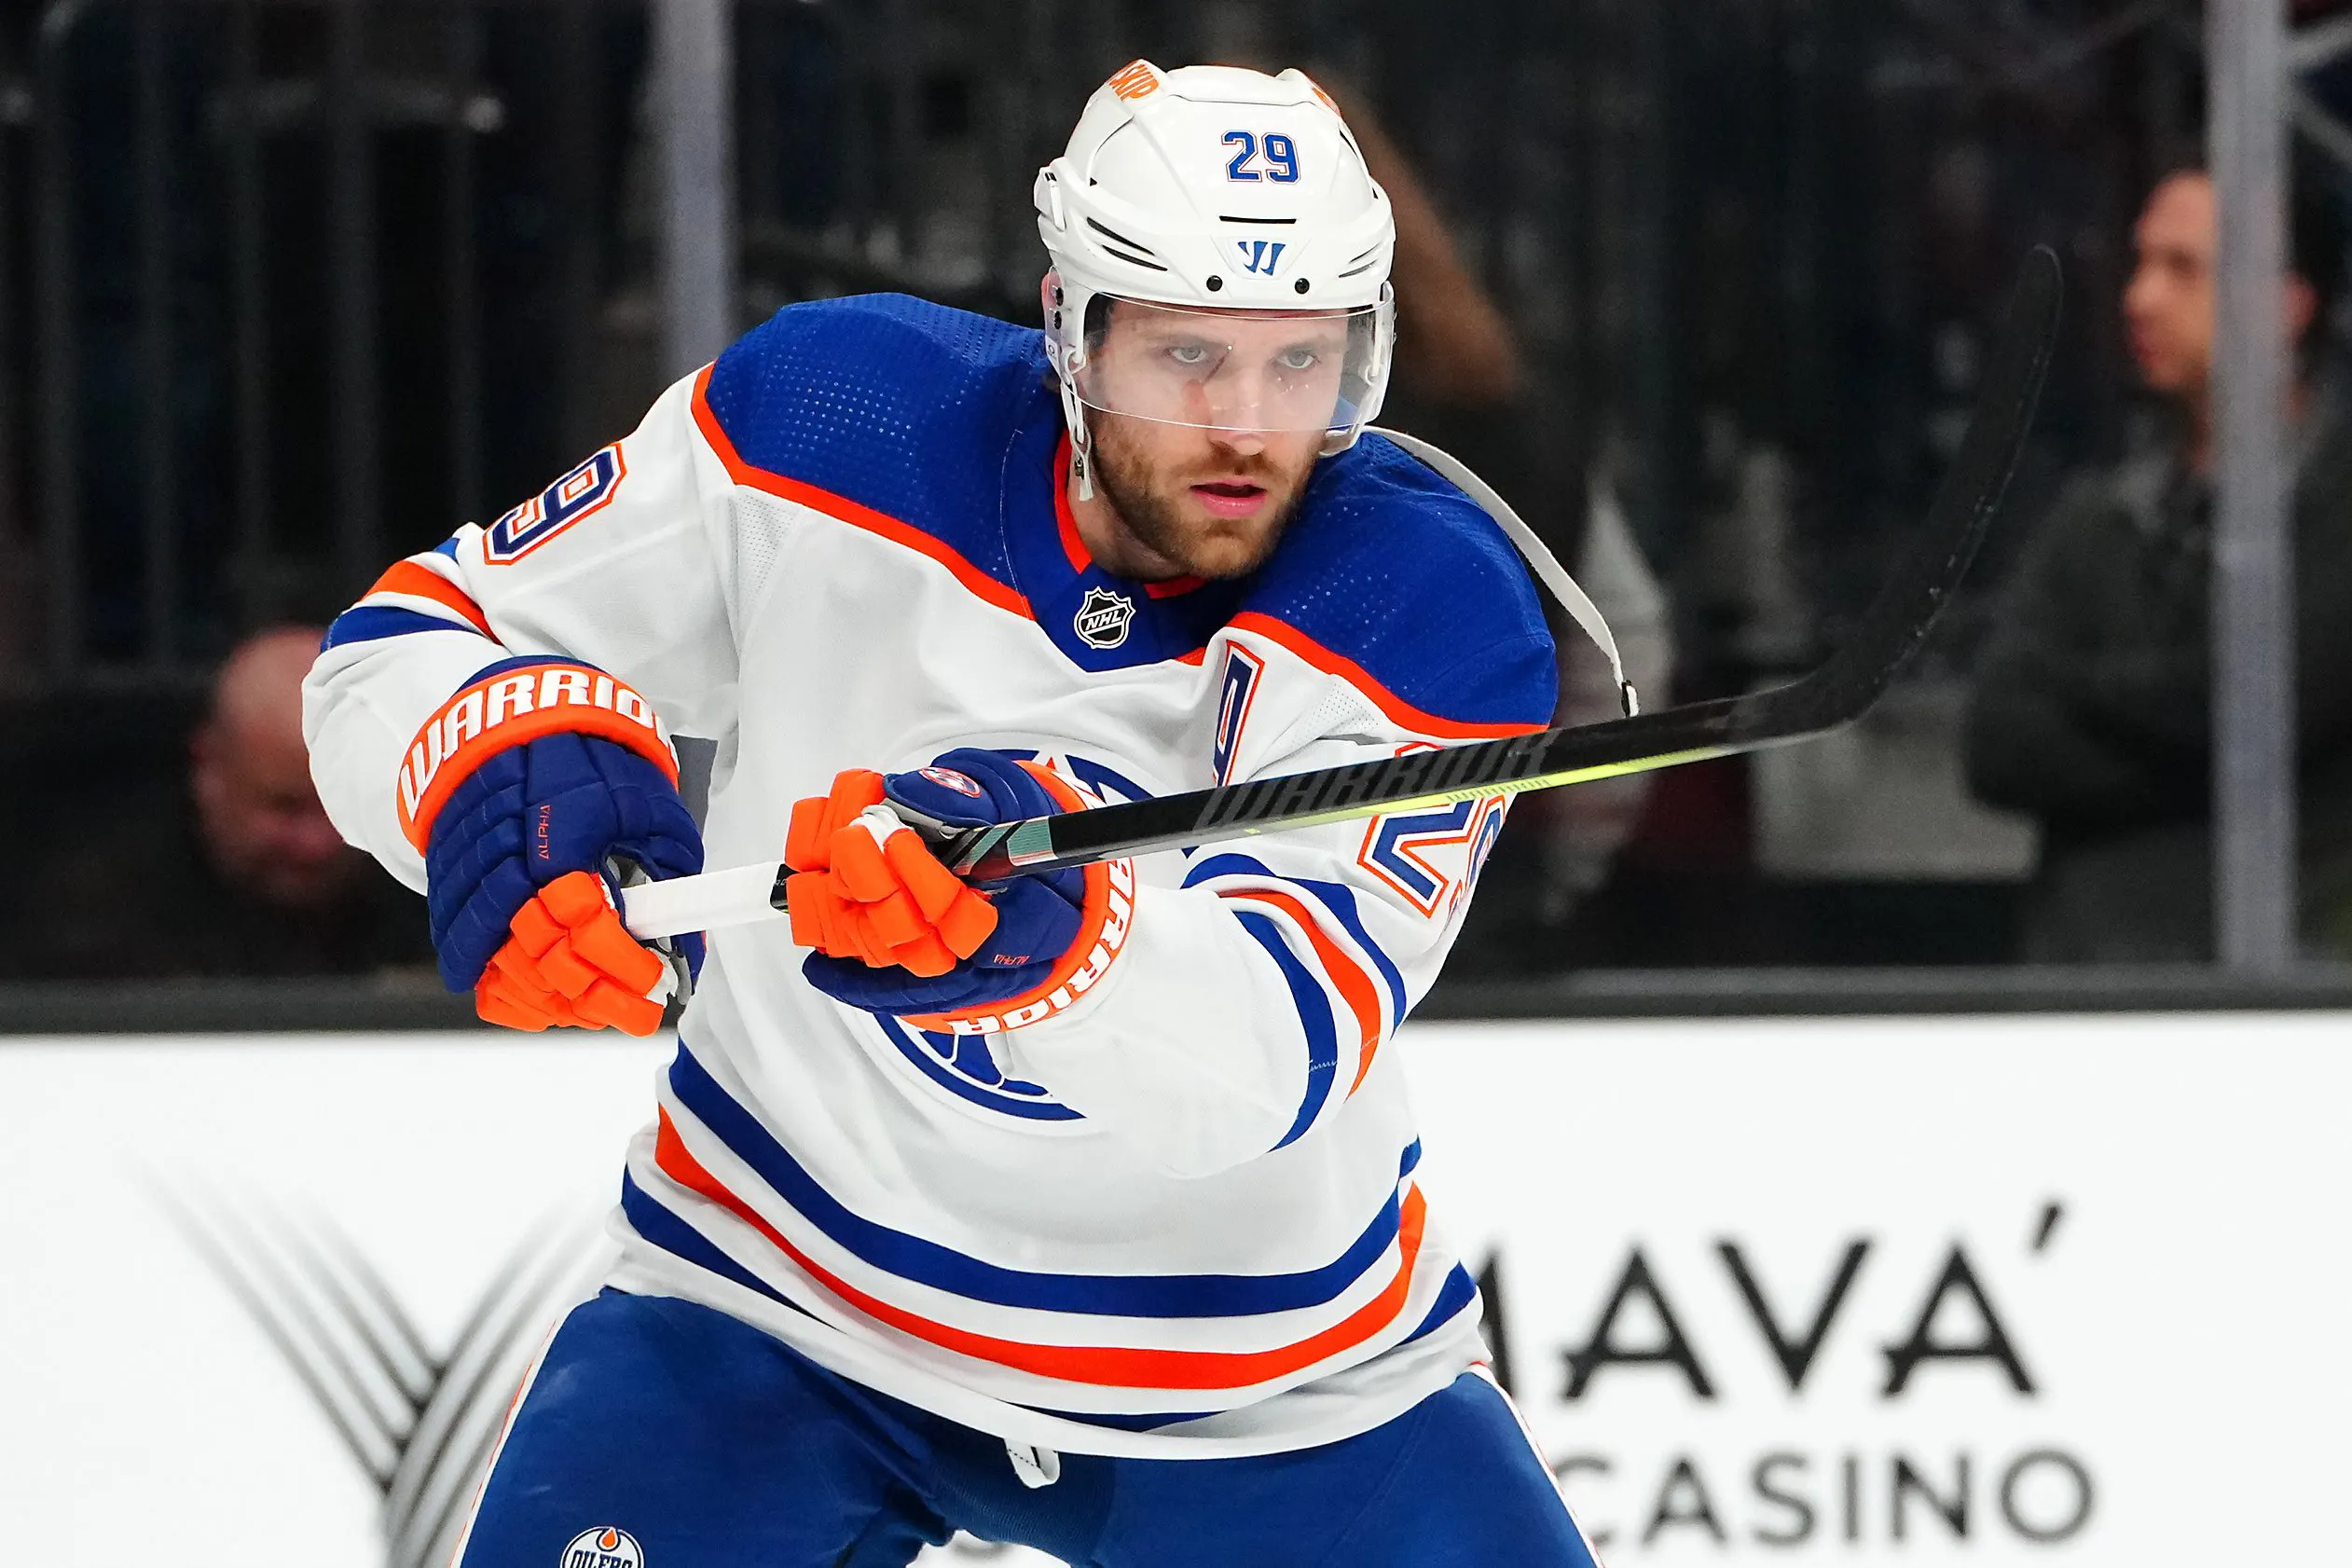 After 700 NHL Games, Leon Draisaitl is Already a Hall of Famer